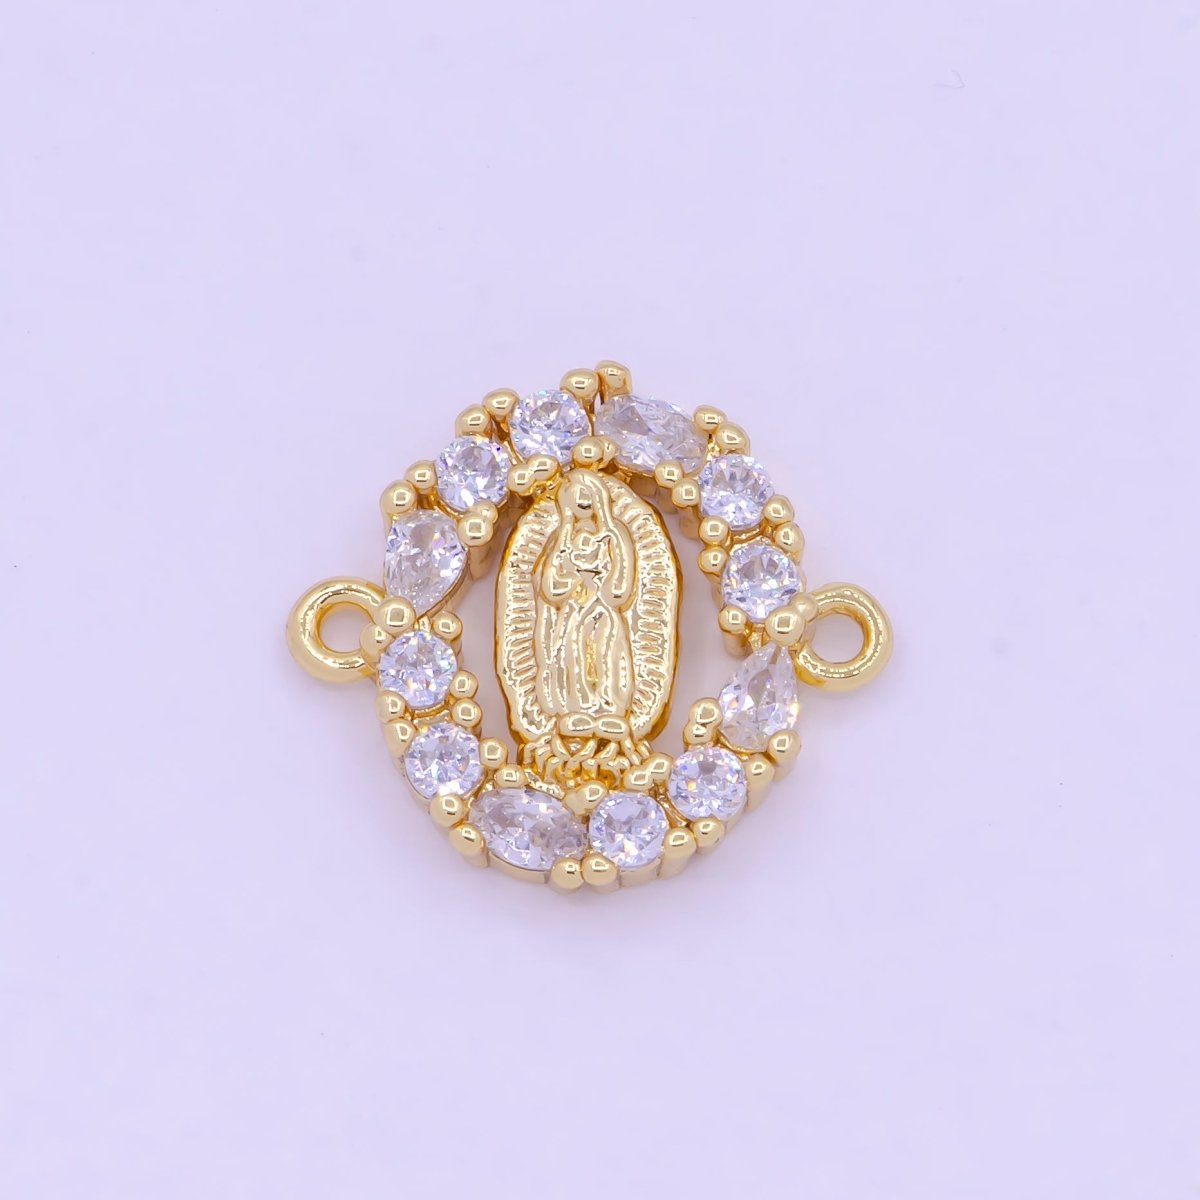 Gold Virgin Mary Connectors, Lady Guadalupe Link Charm Connector, Medallion Religious Jewelry Bracelet G-469 - DLUXCA